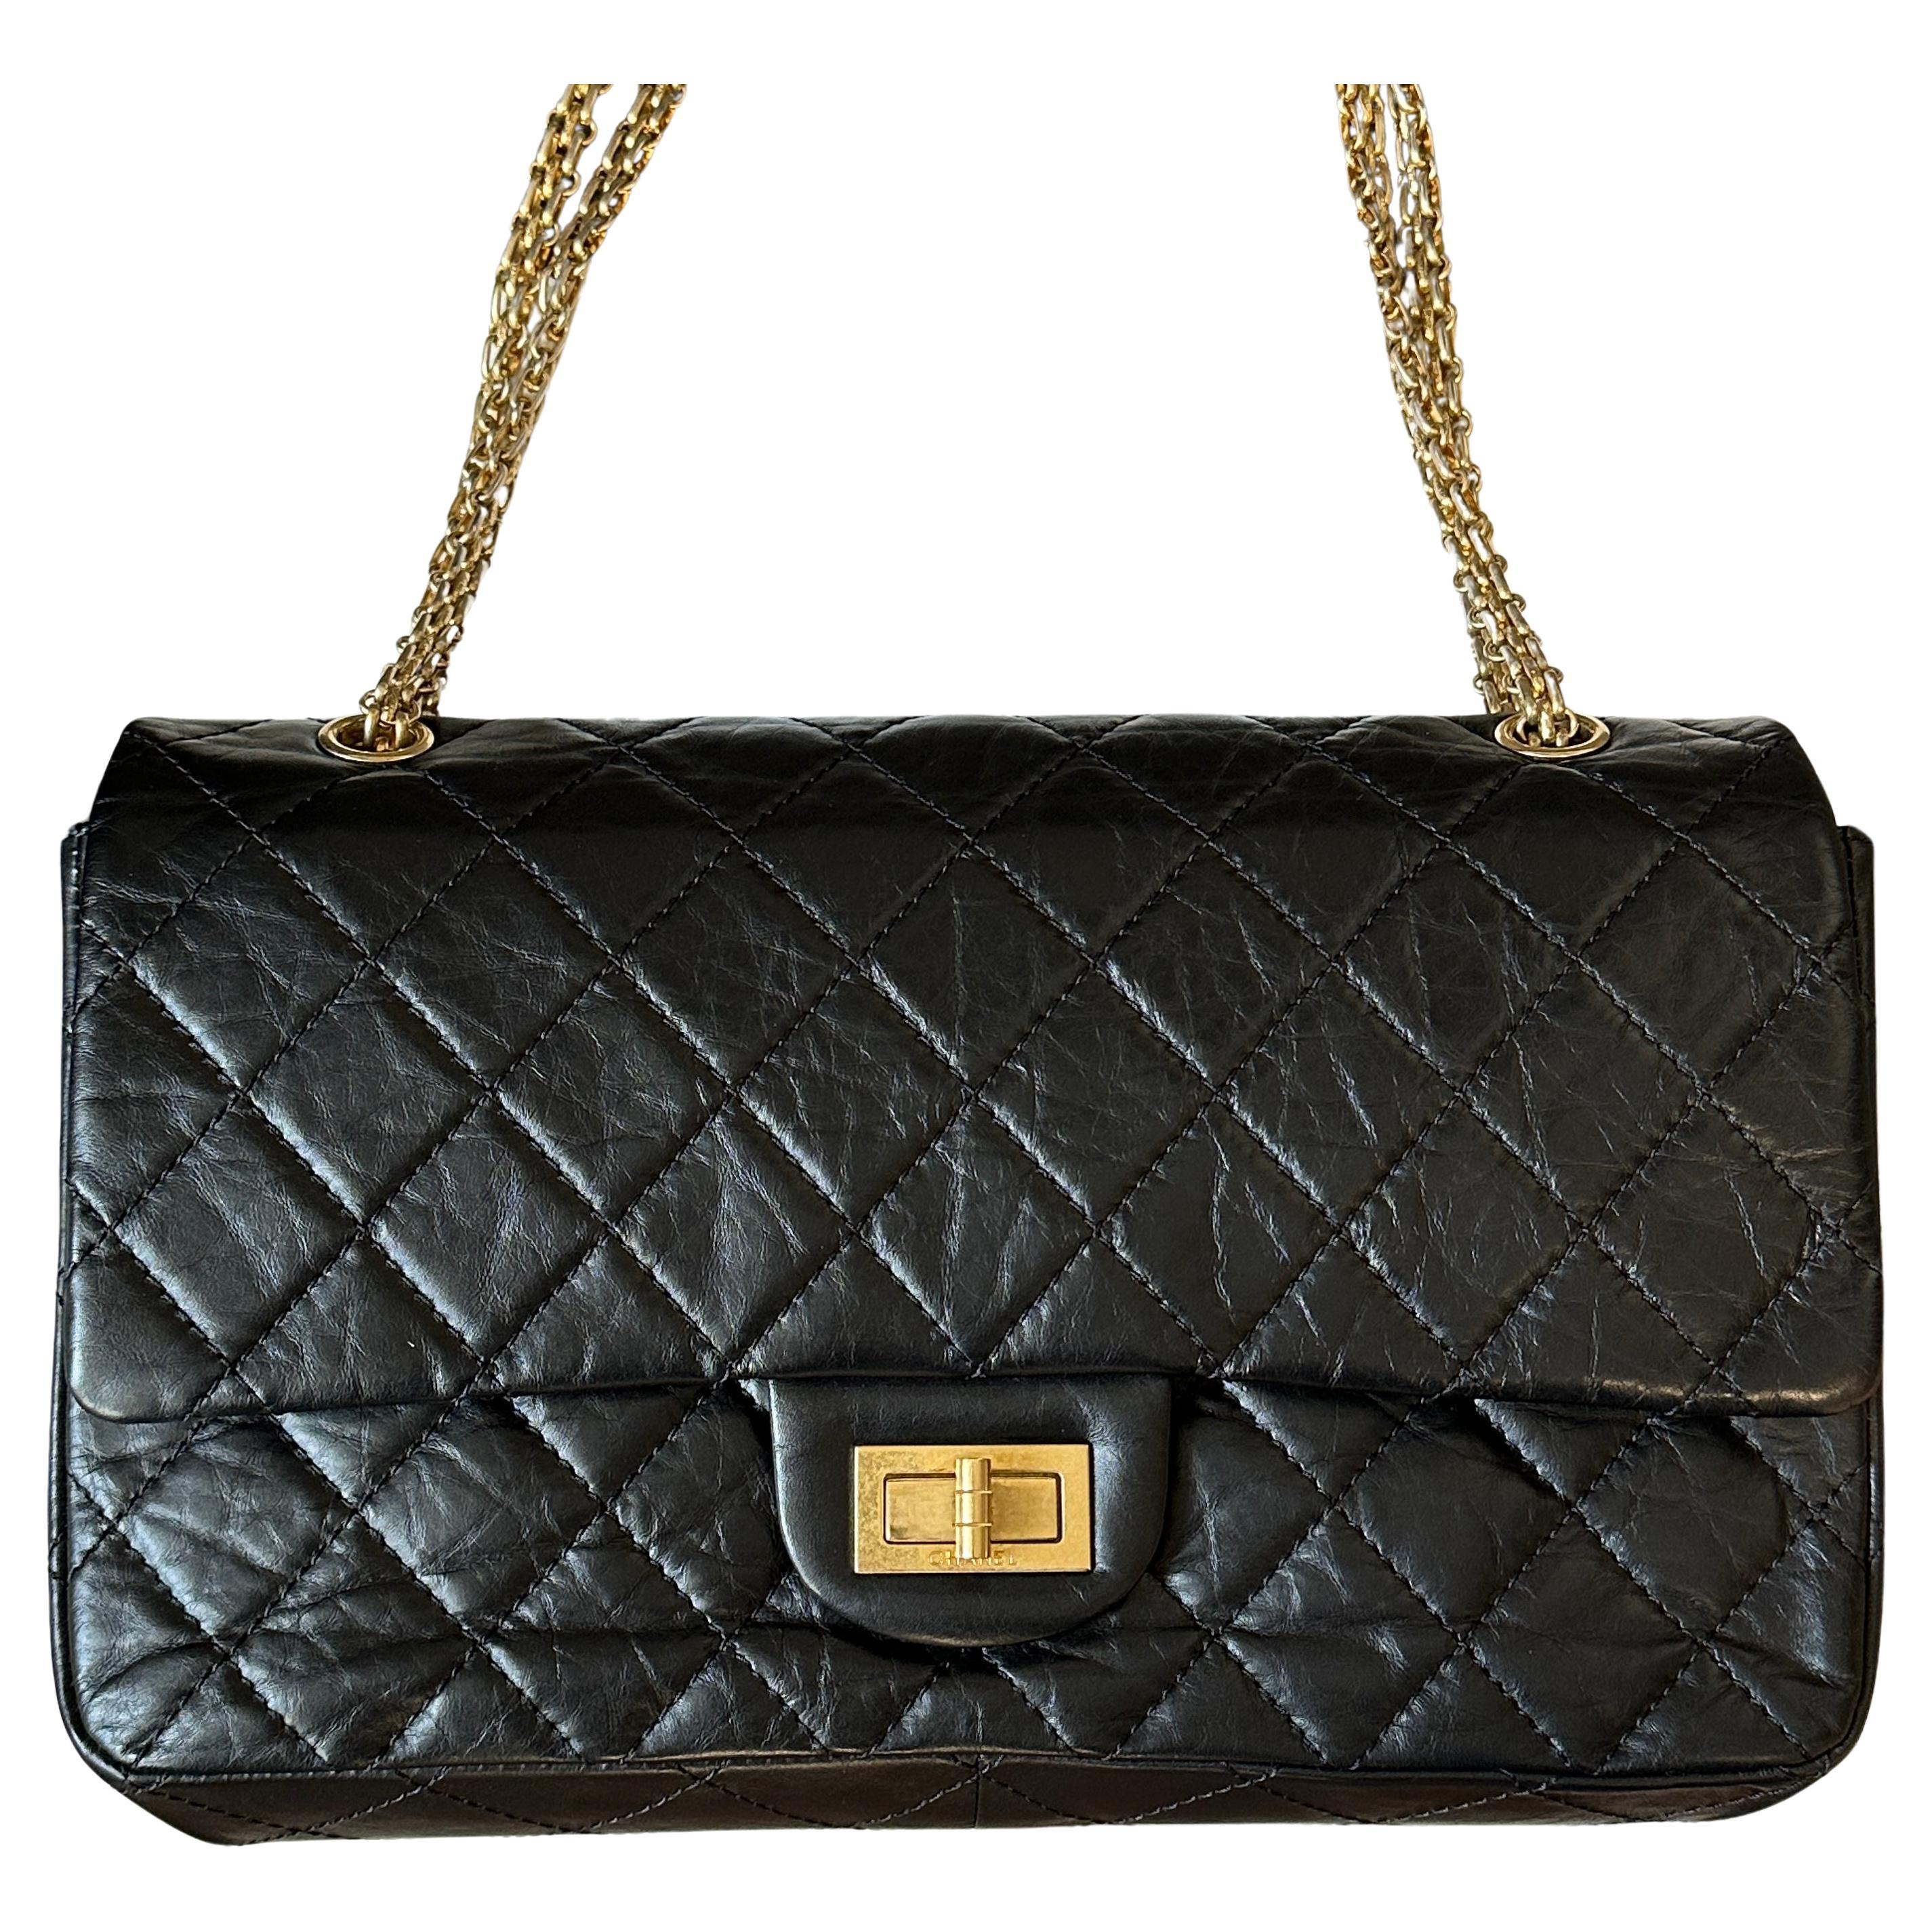 Chanel A37590 Maxi, Jumbo Flap Bag 2.55 Black/Gold Distressed Lambskin For Sale